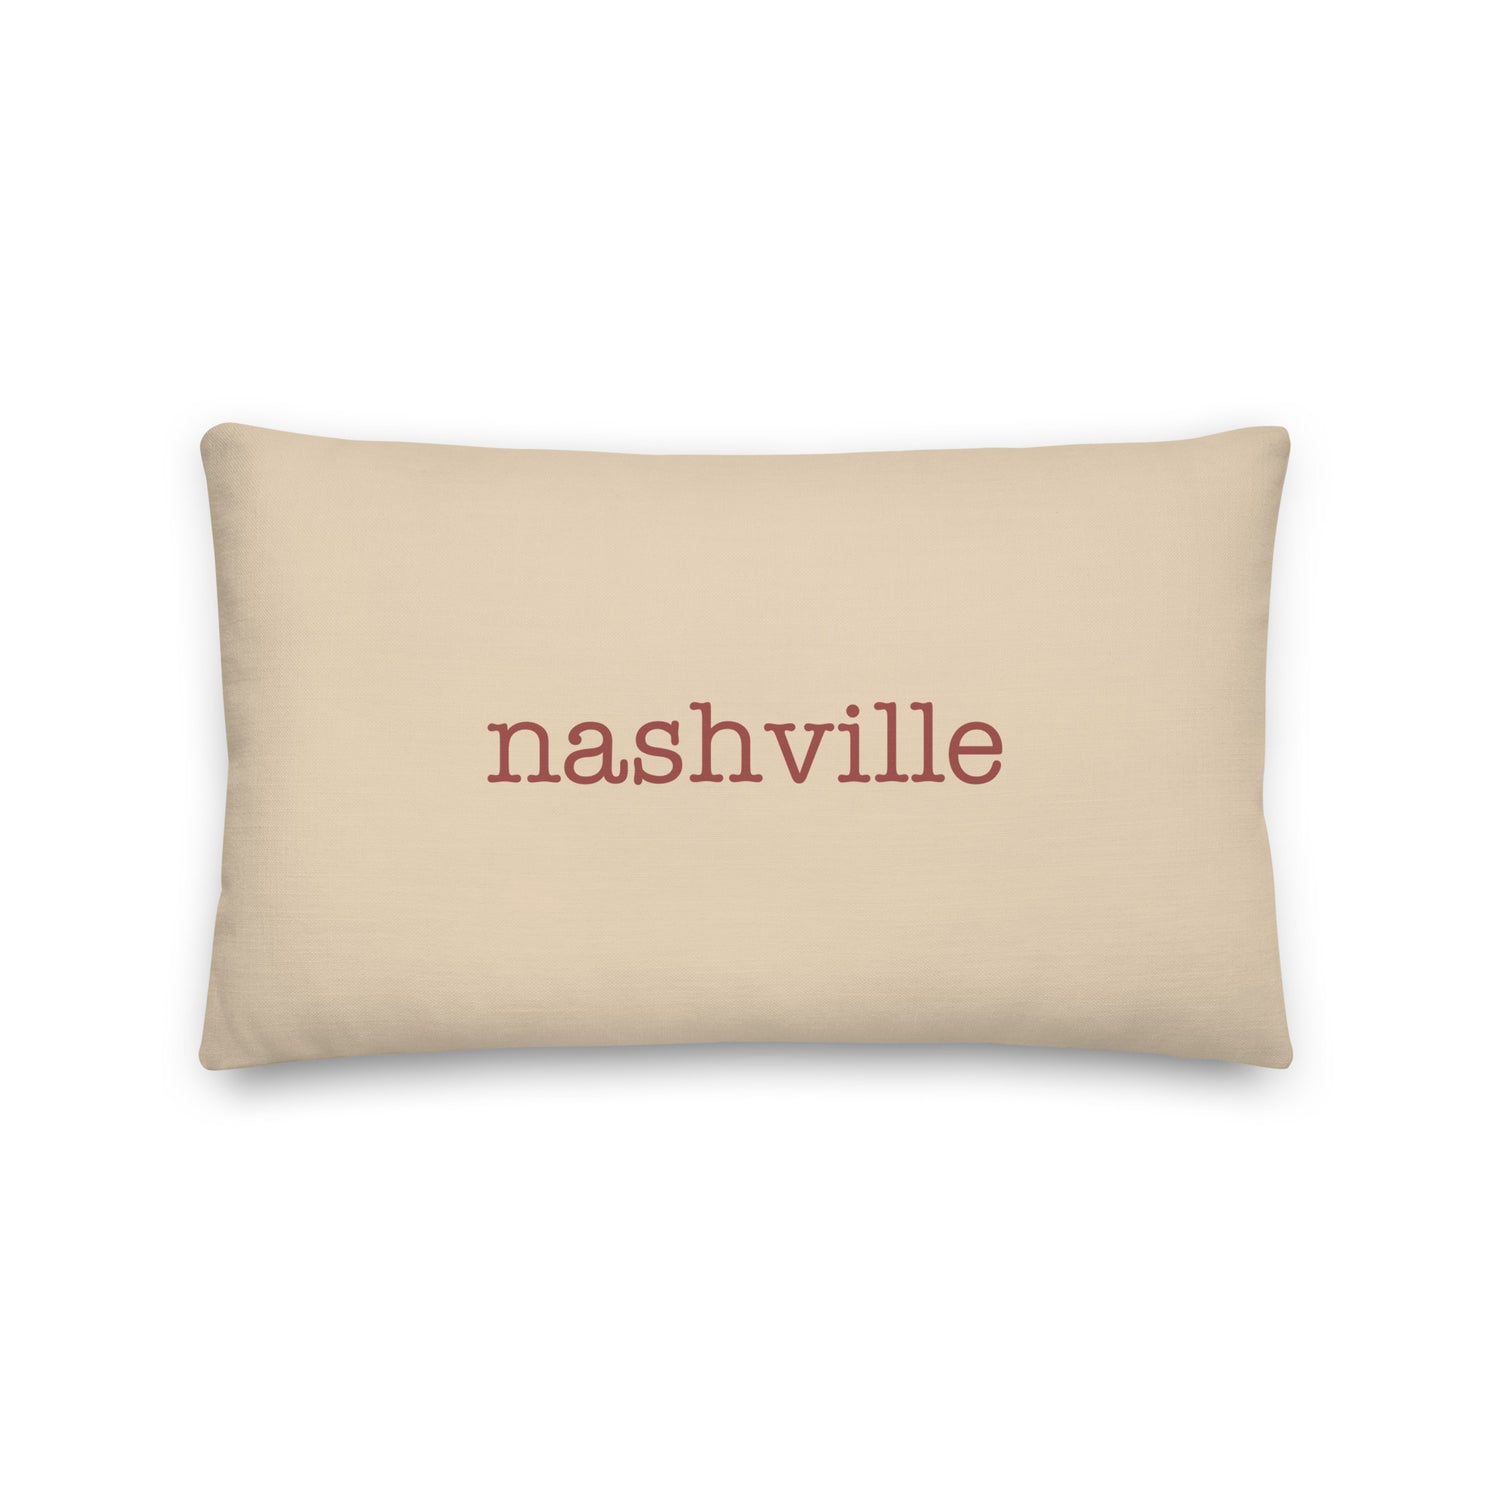 Nashville Tennessee Pillows and Blankets • BNA Airport Code